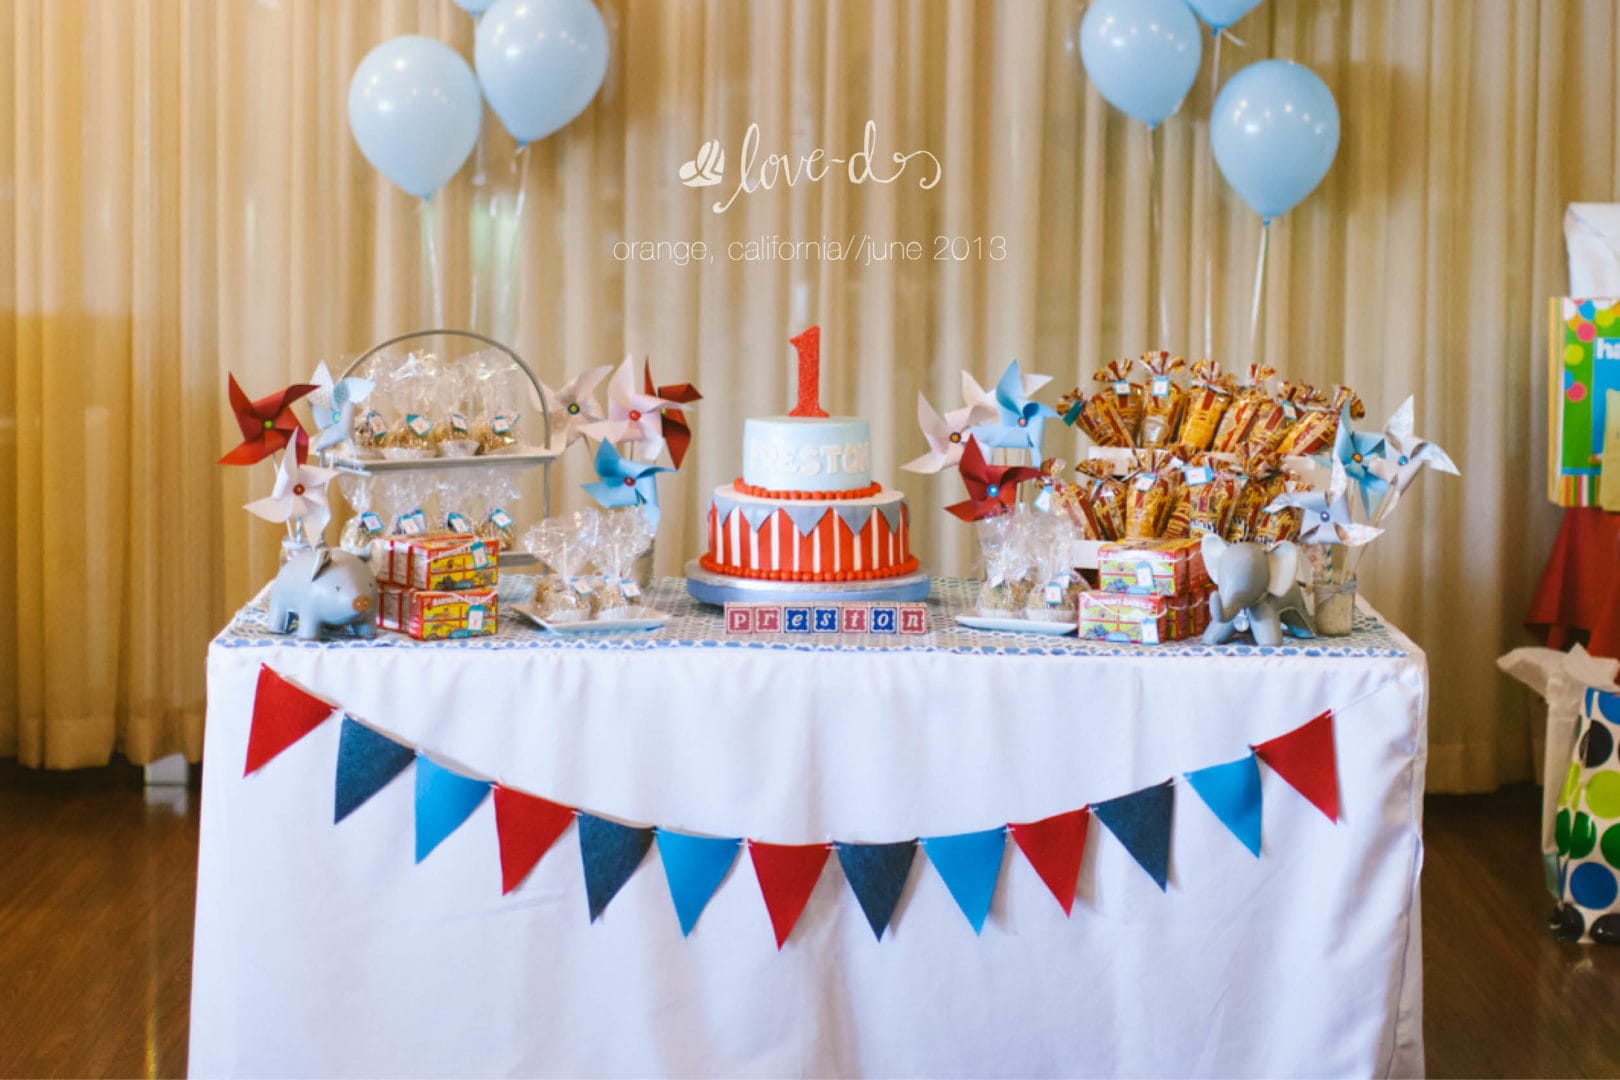 How to Create a Dessert Table for Your Child’s Birthday